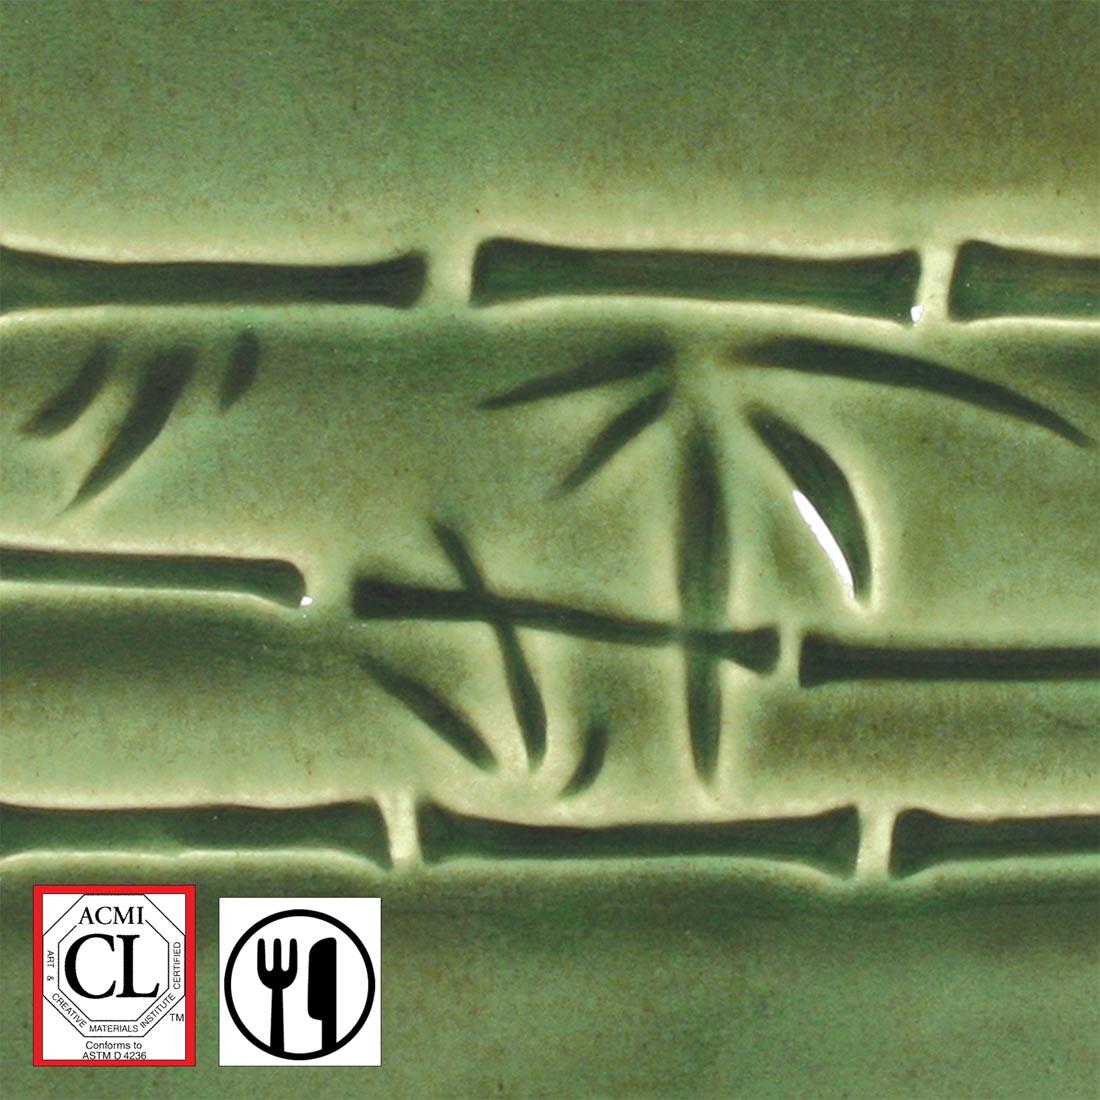 clay tile with Dark Green AMACO Potter's Choice High Fire Glaze applied; symbols for Cautionary Label and food safe